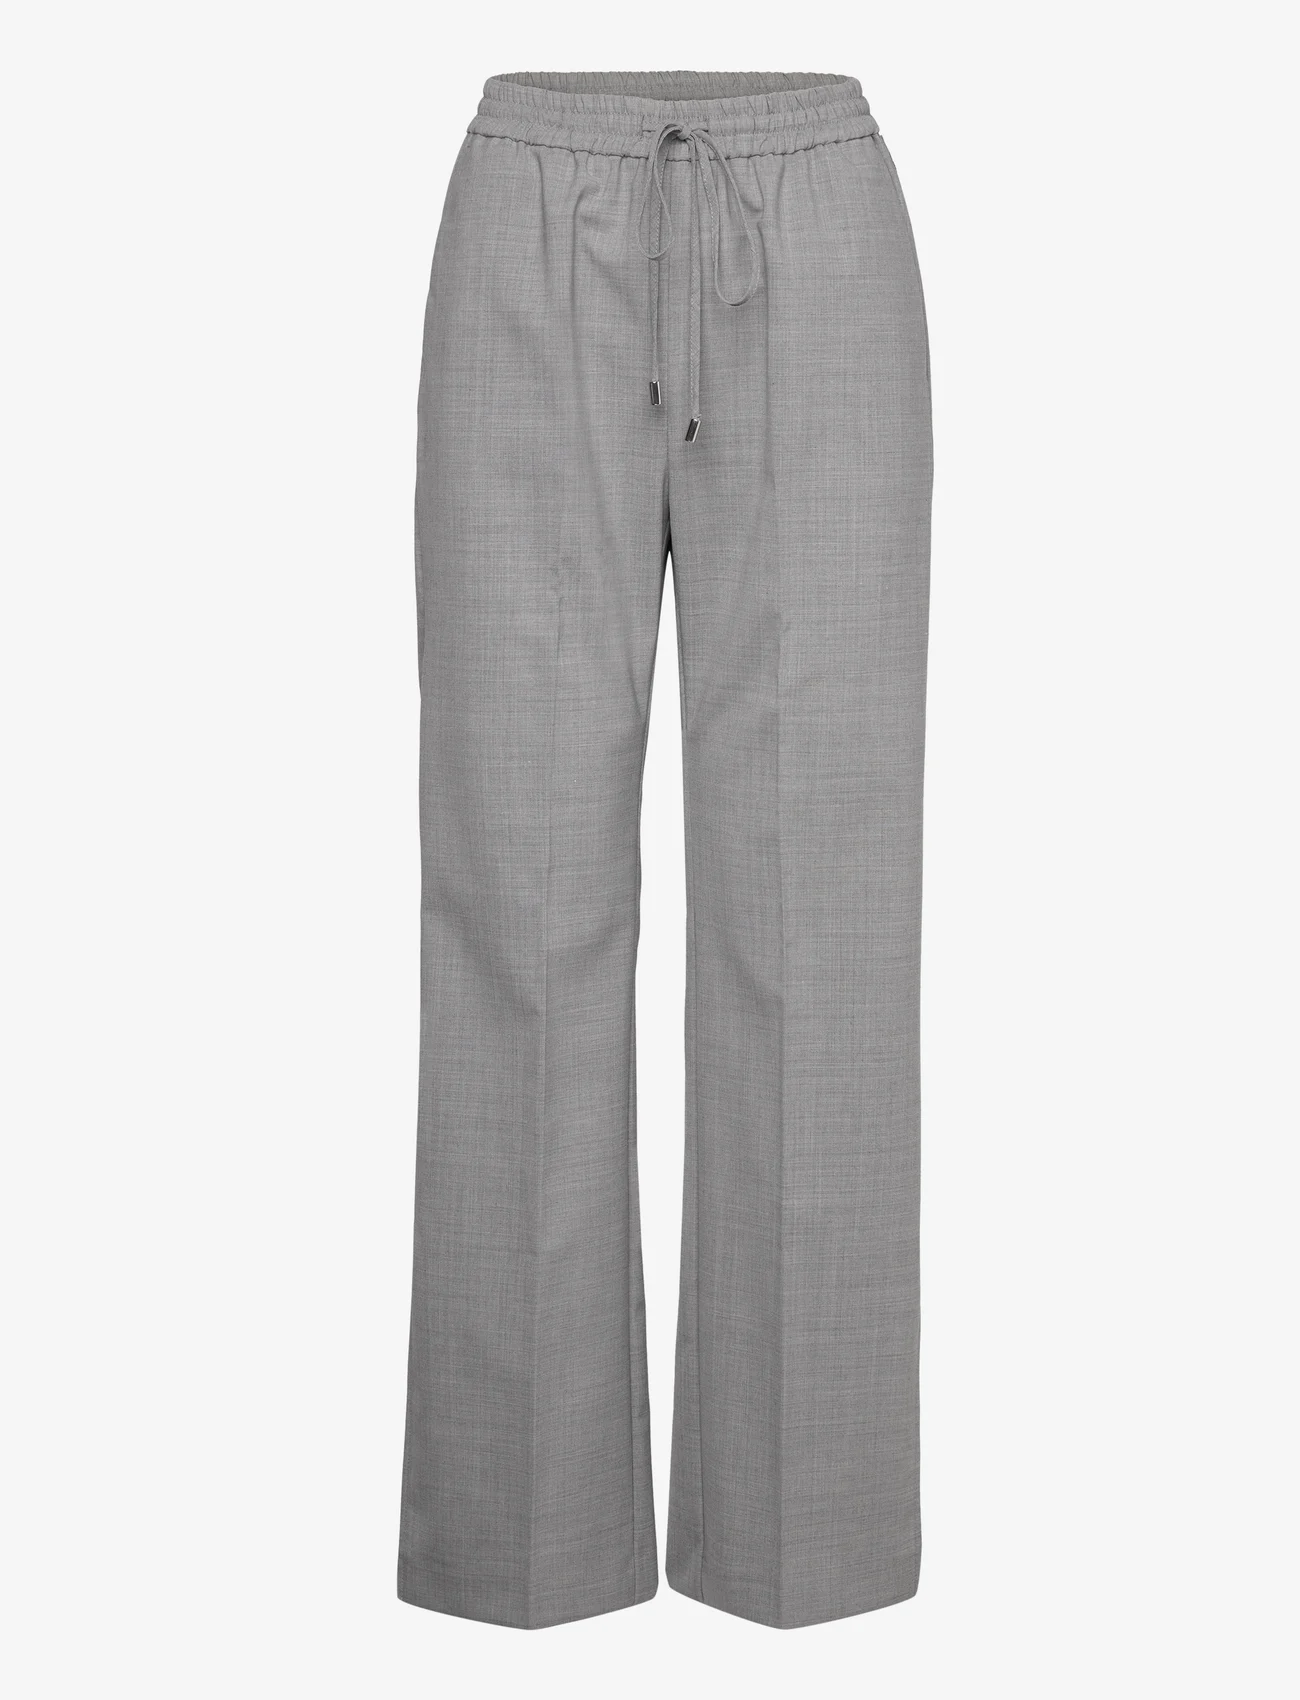 Max&Co. - GRISSINO - wide leg trousers - light grey - 0